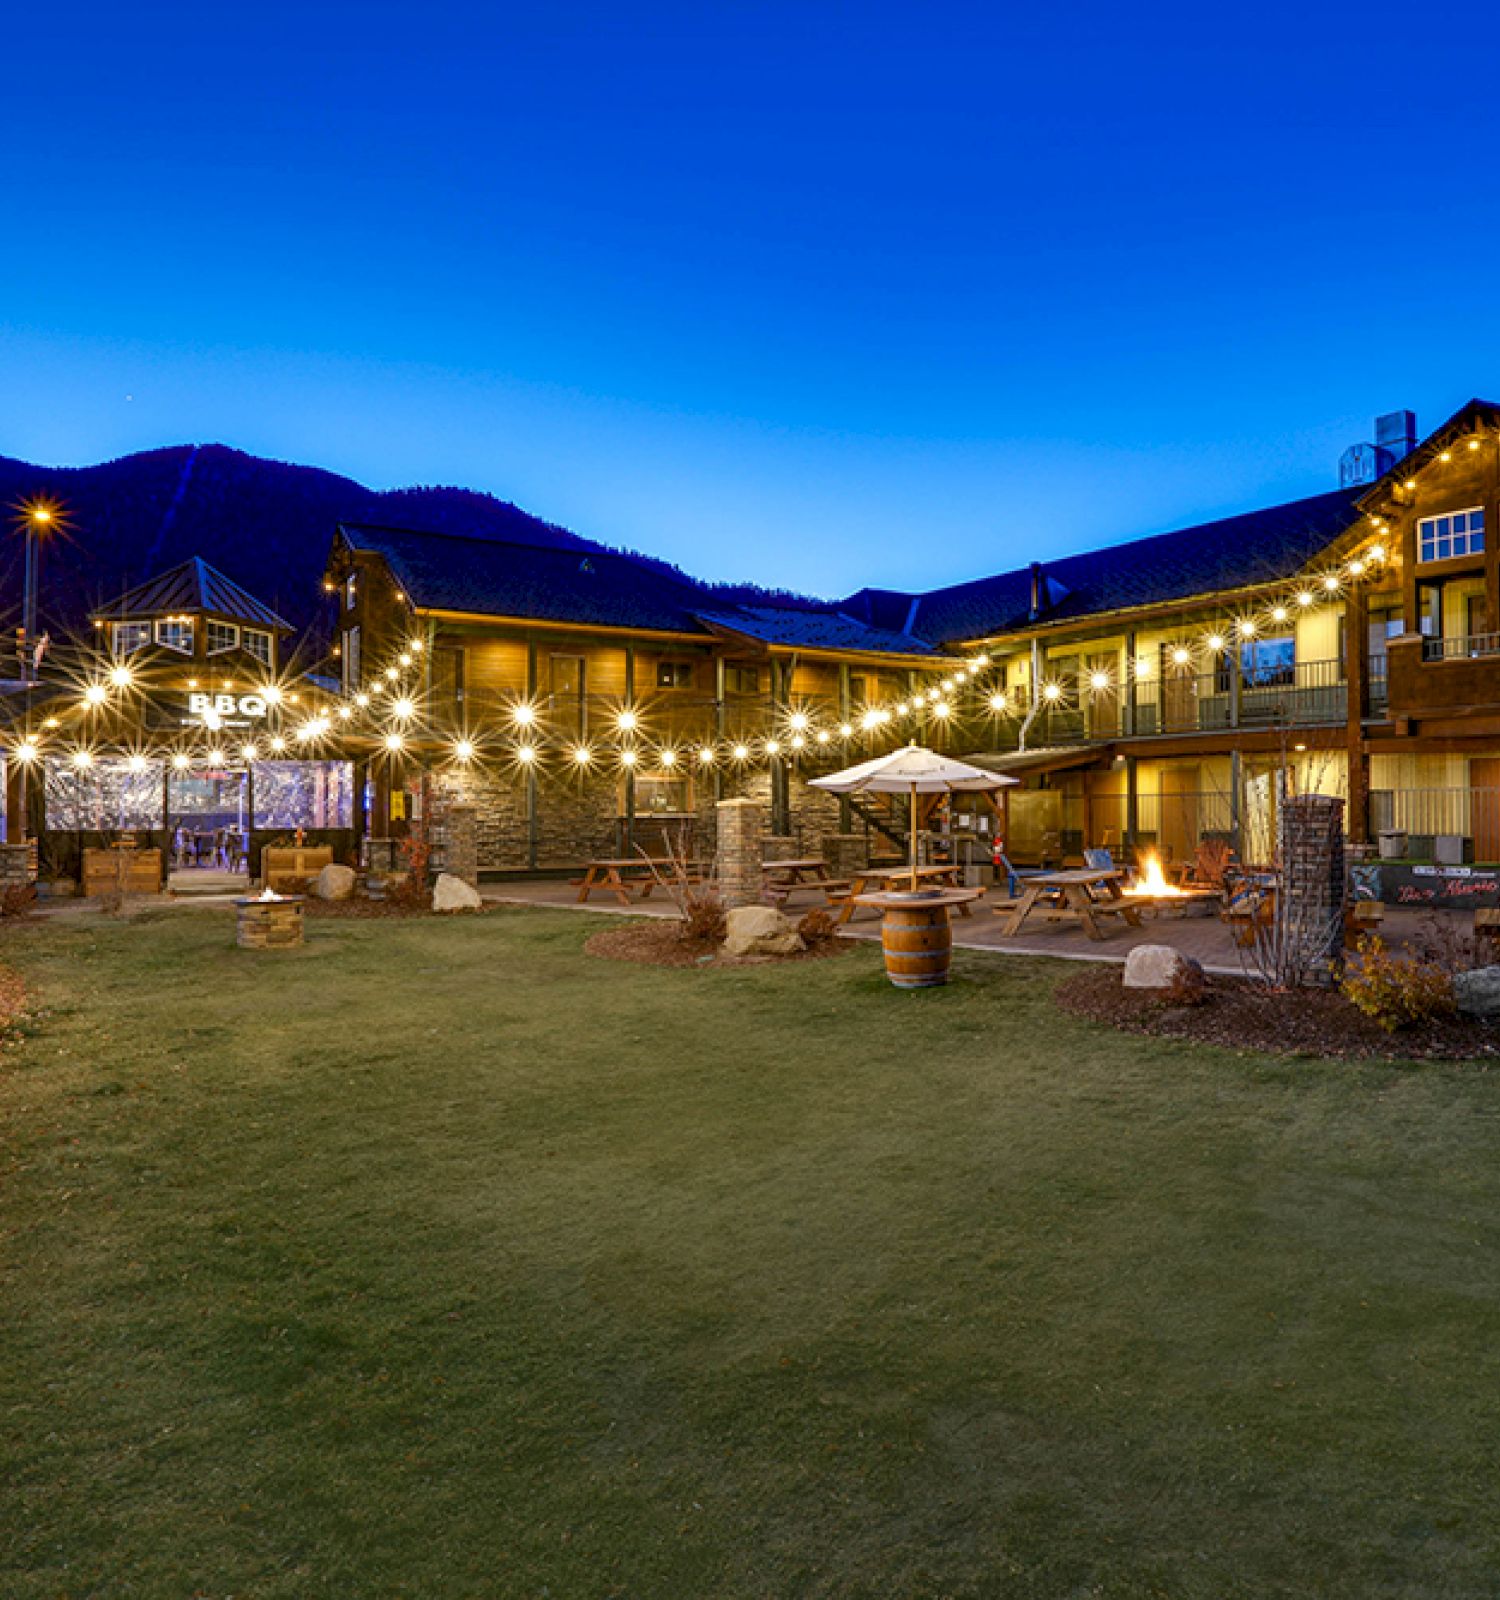 A cozy outdoor area of a lit-up hotel or lodge during the evening, featuring string lights, a green lawn, and mountains in the background.